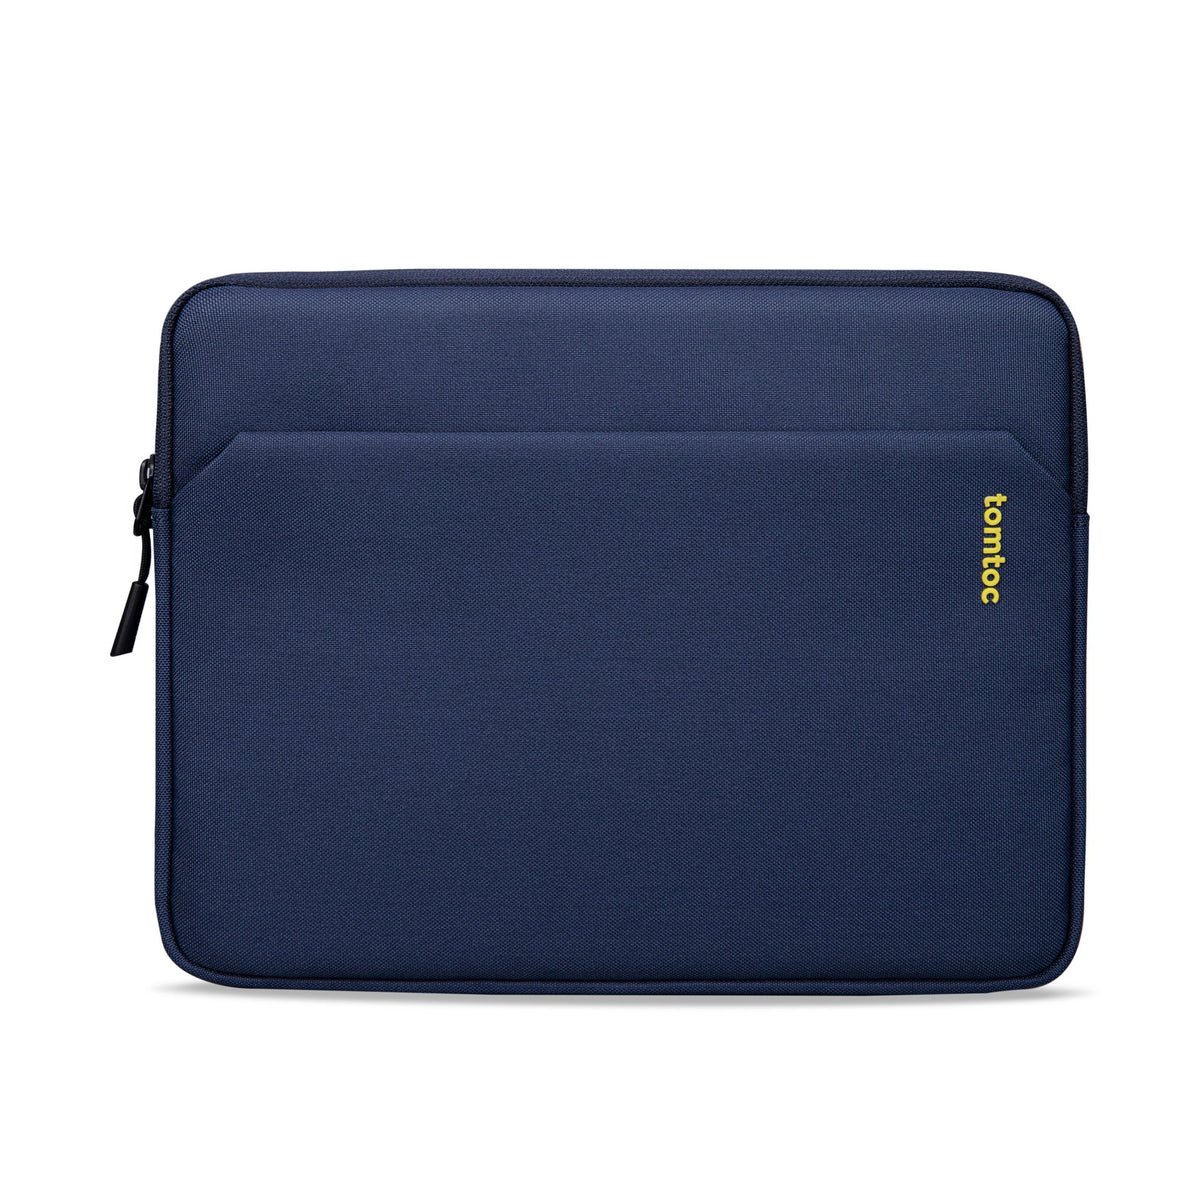 primary_Light-B18 Tablet Sleeve for 12.9 inch iPad Pro